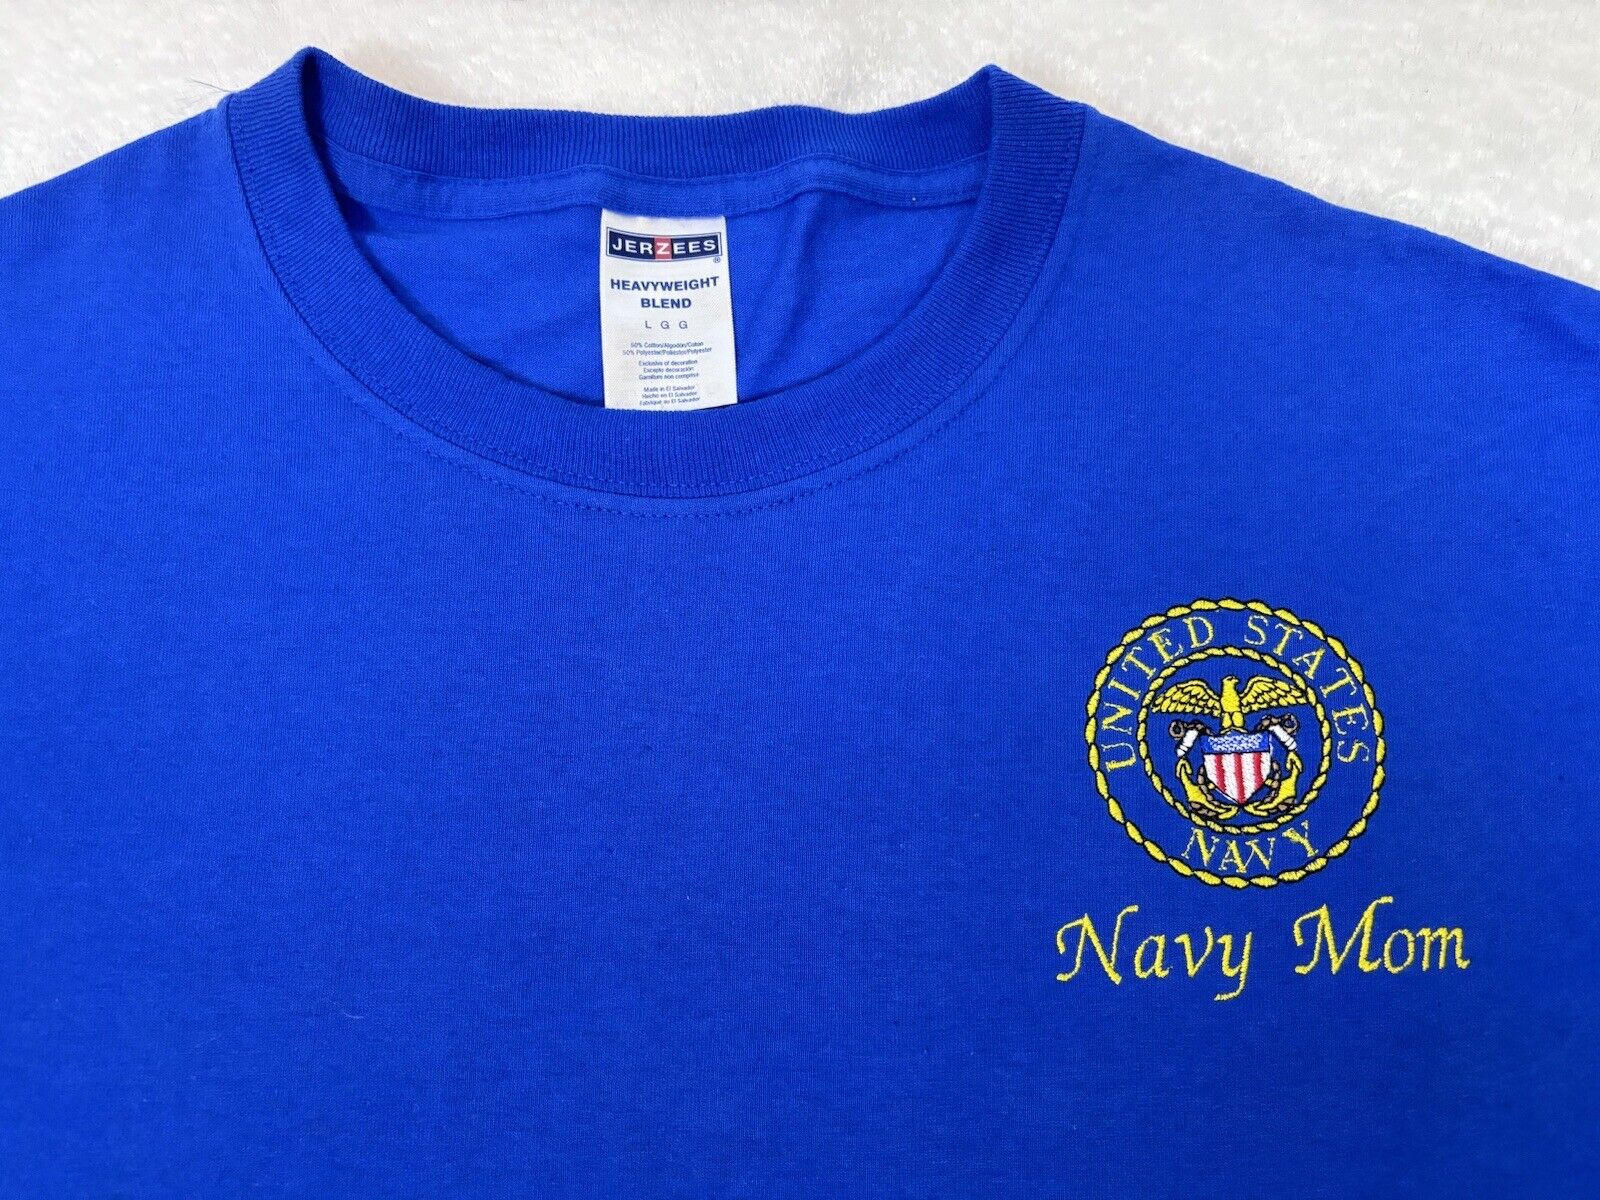 Navy Mom Embroidered Mother USA Military Shirt Vintage United States Naval